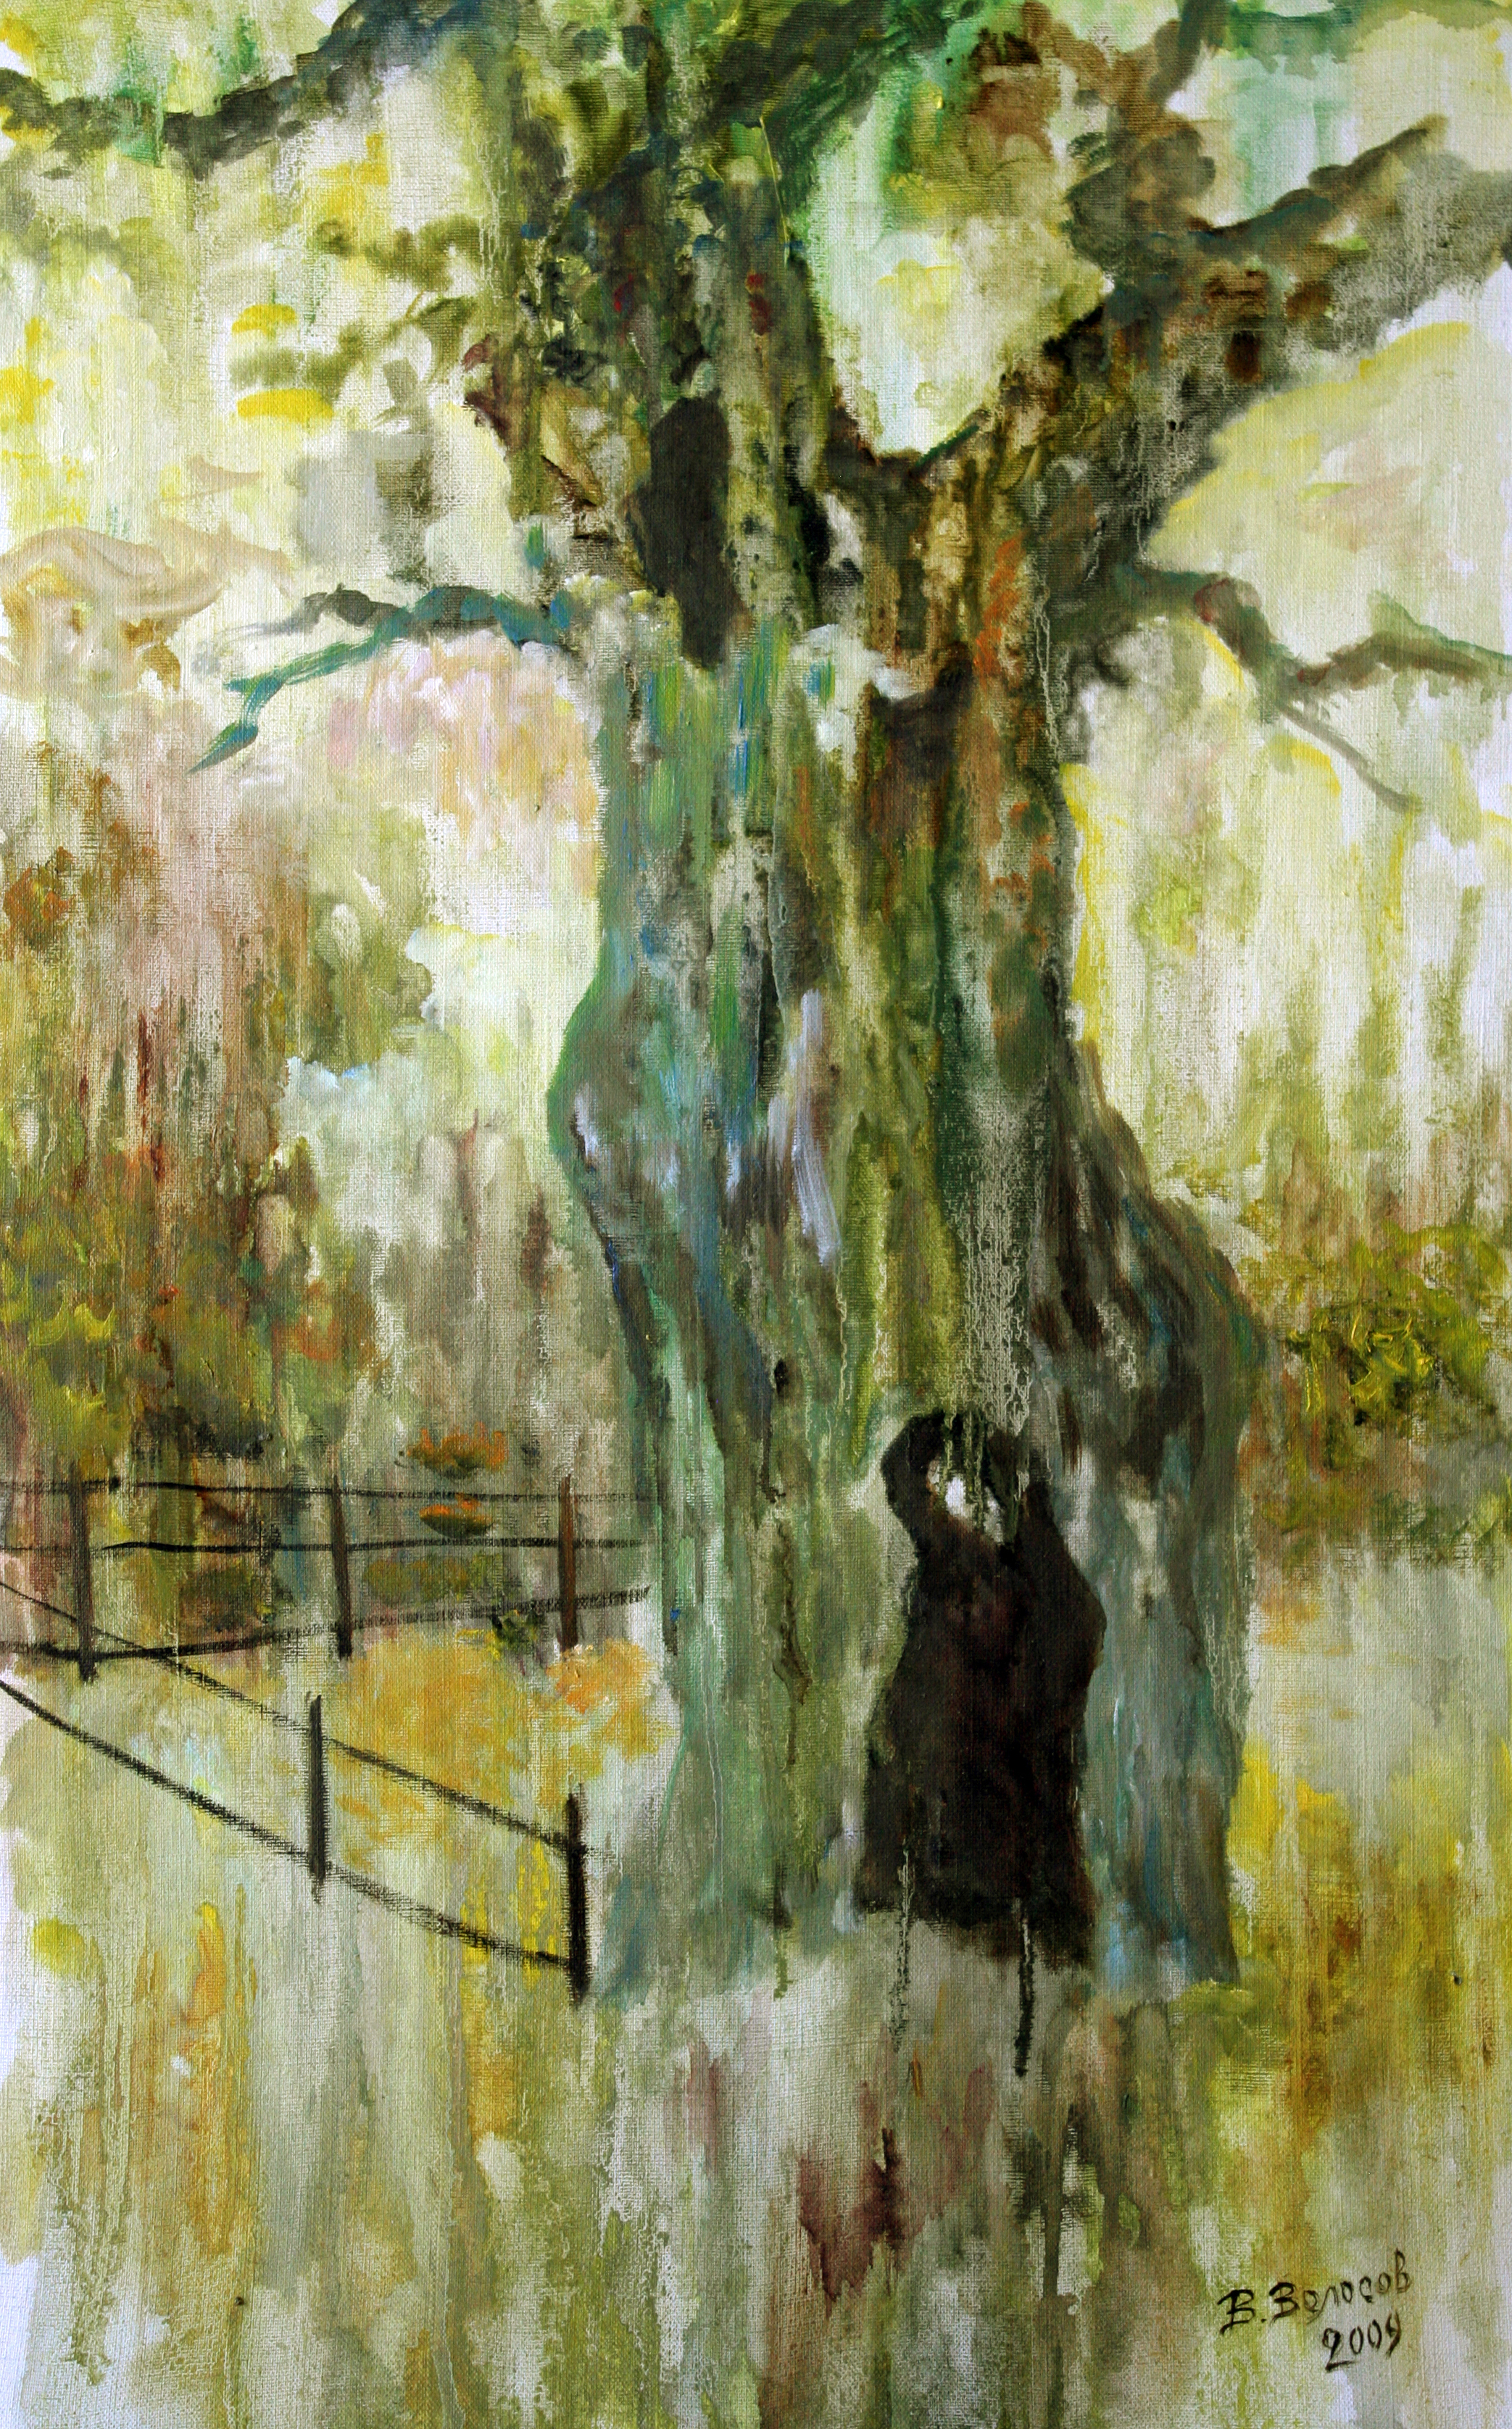 'CRYING OAK' - Oil on Canvas